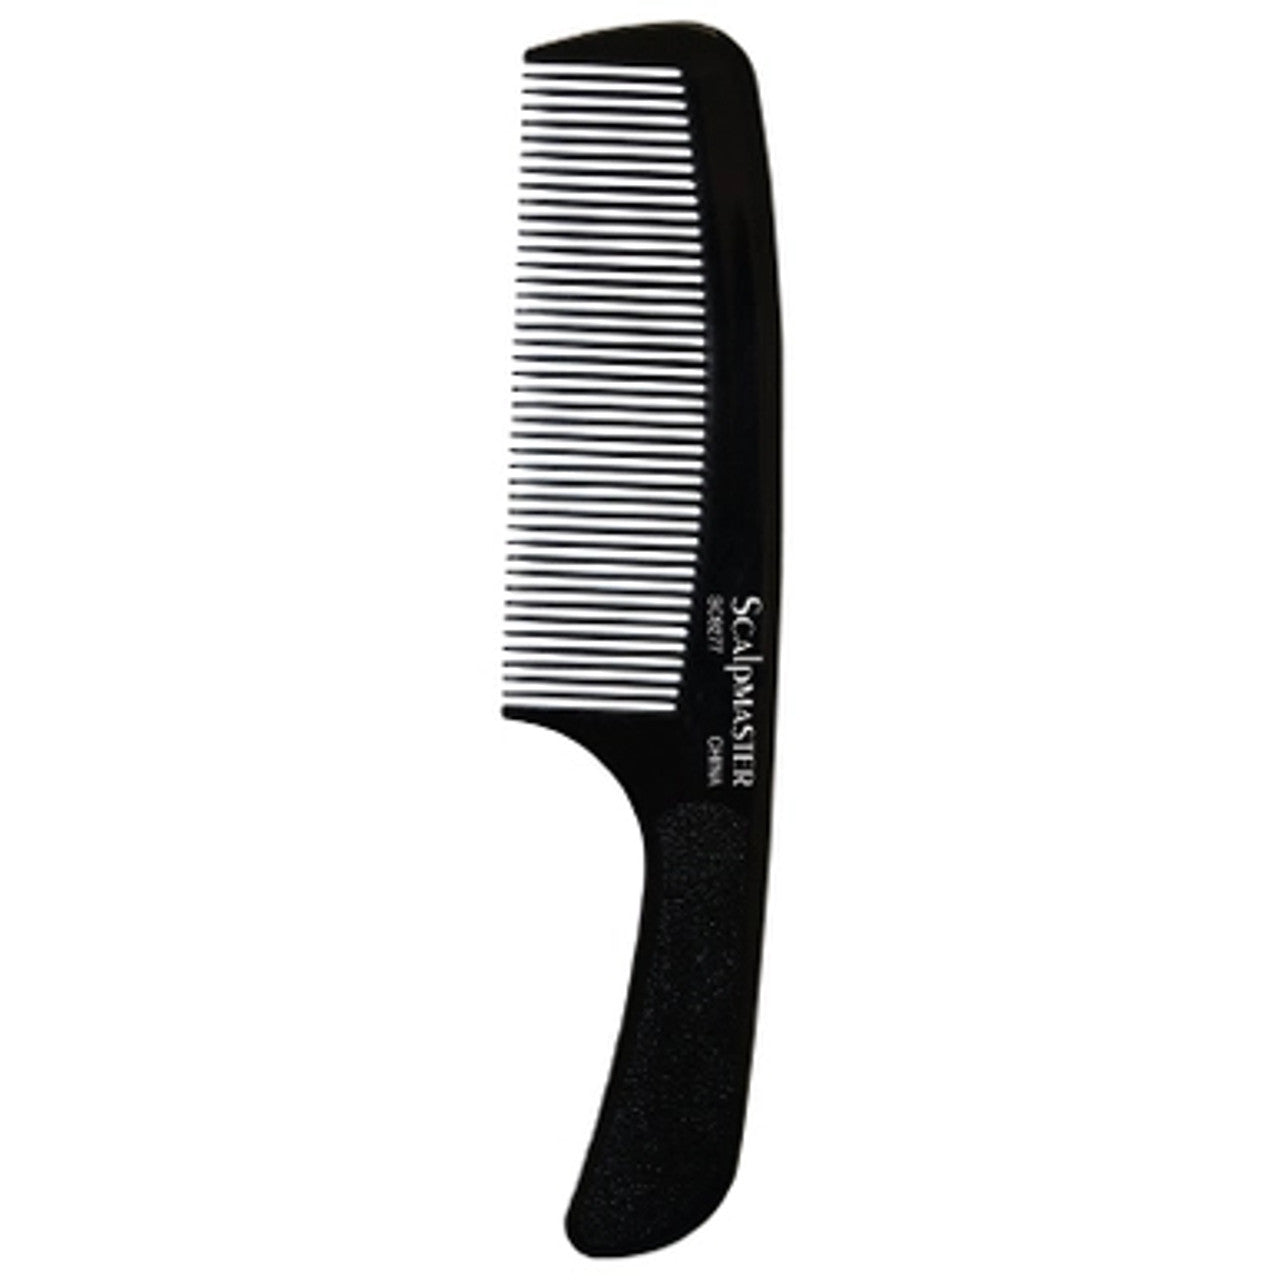 Scalpmaster Professional Styling Comb - Black - 8in.